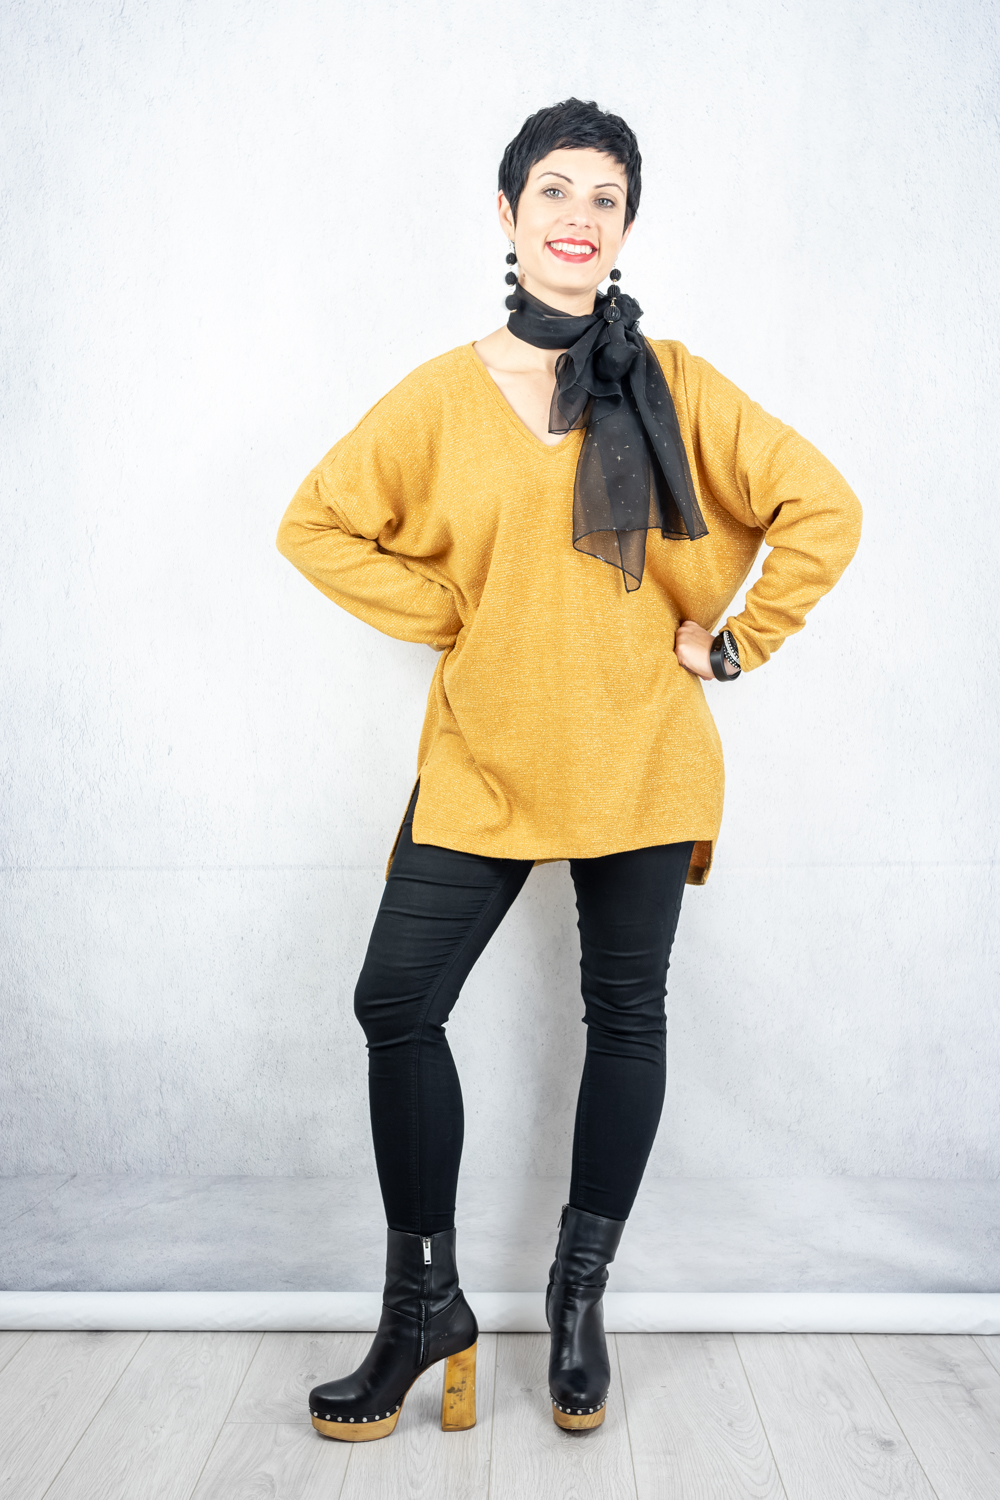 Oversized saffron jumper with metallic thread paired with skinny jeans, wooden platforms and a black scarf